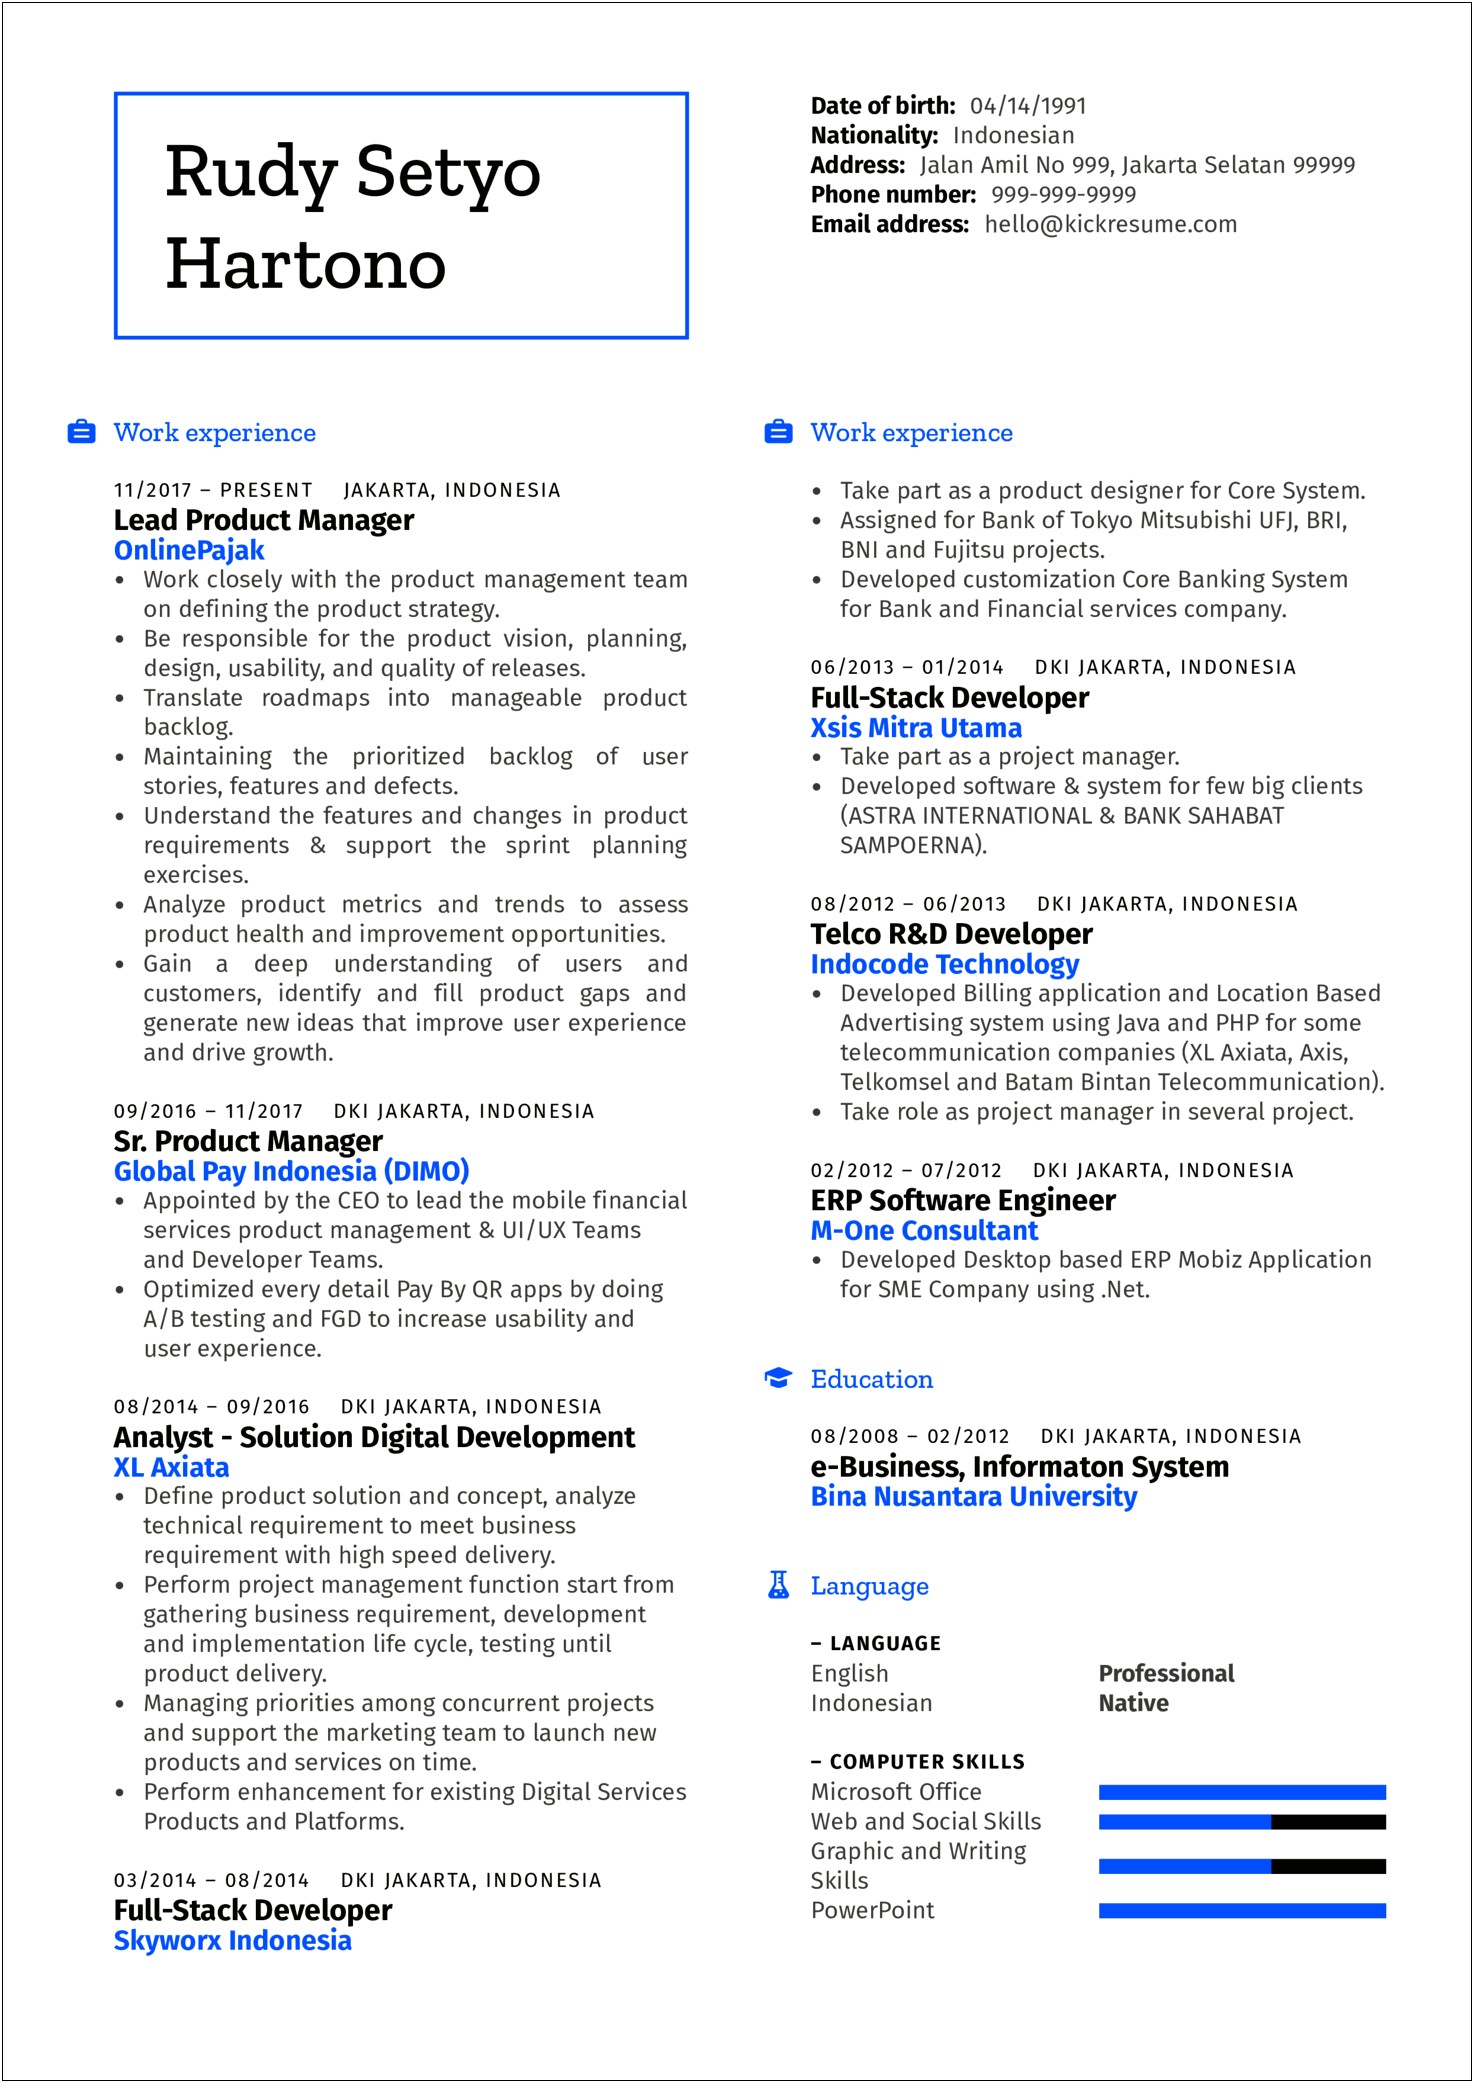 Technical Product Manager Resume Description